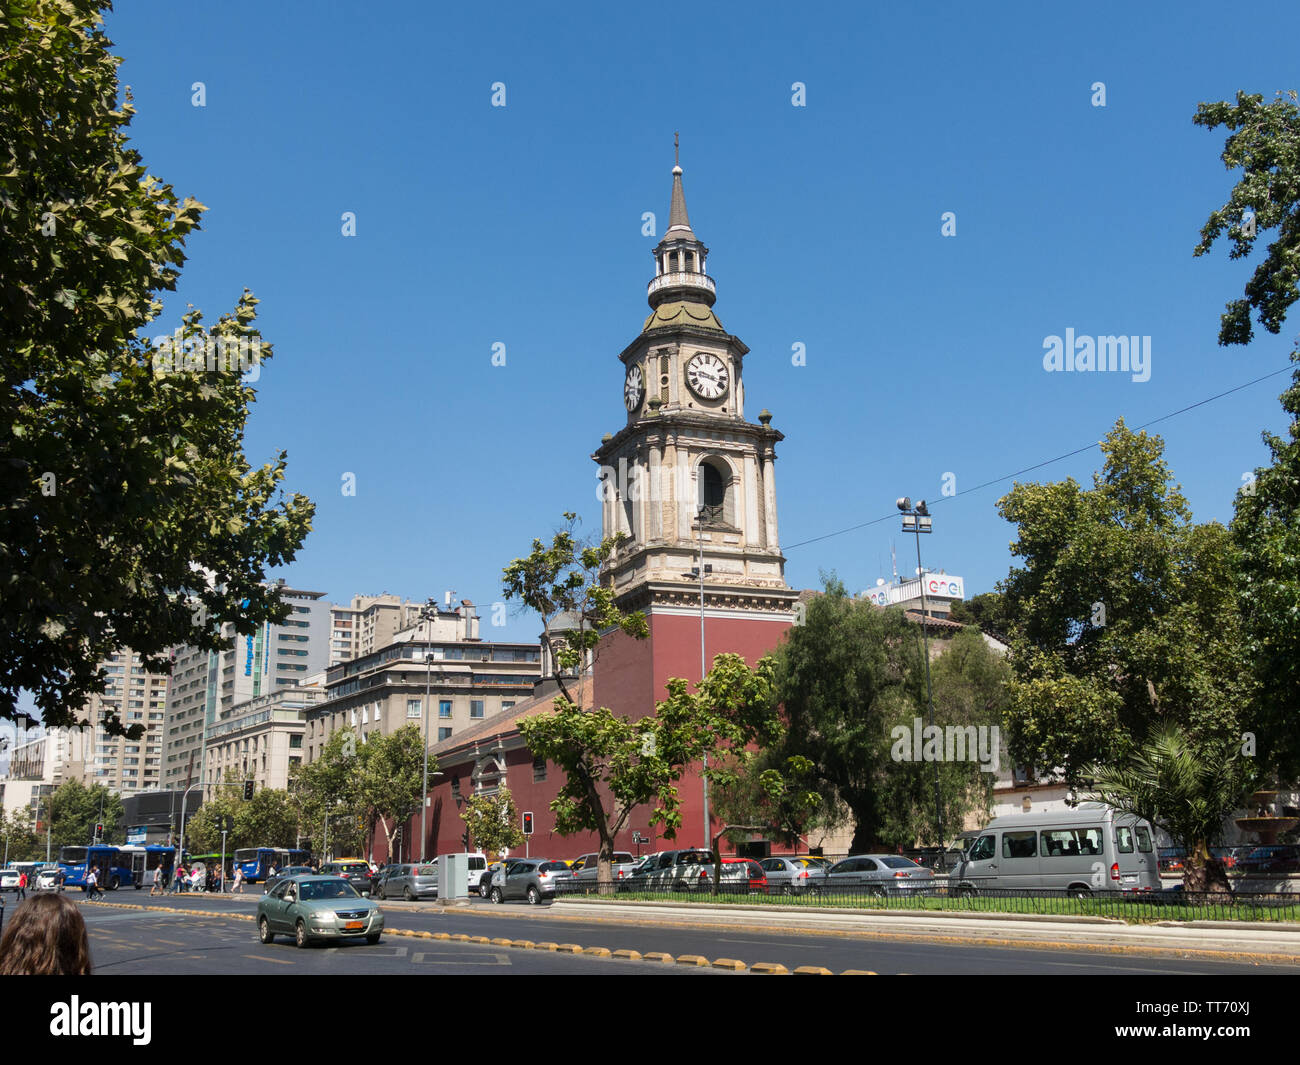 SANTIAGO DE CHILE, CHILE - JANUARY 26, 2018: The church of San Francisco, Catholic temple and old convent, in the Alameda, the main avenue of Santiago Stock Photo